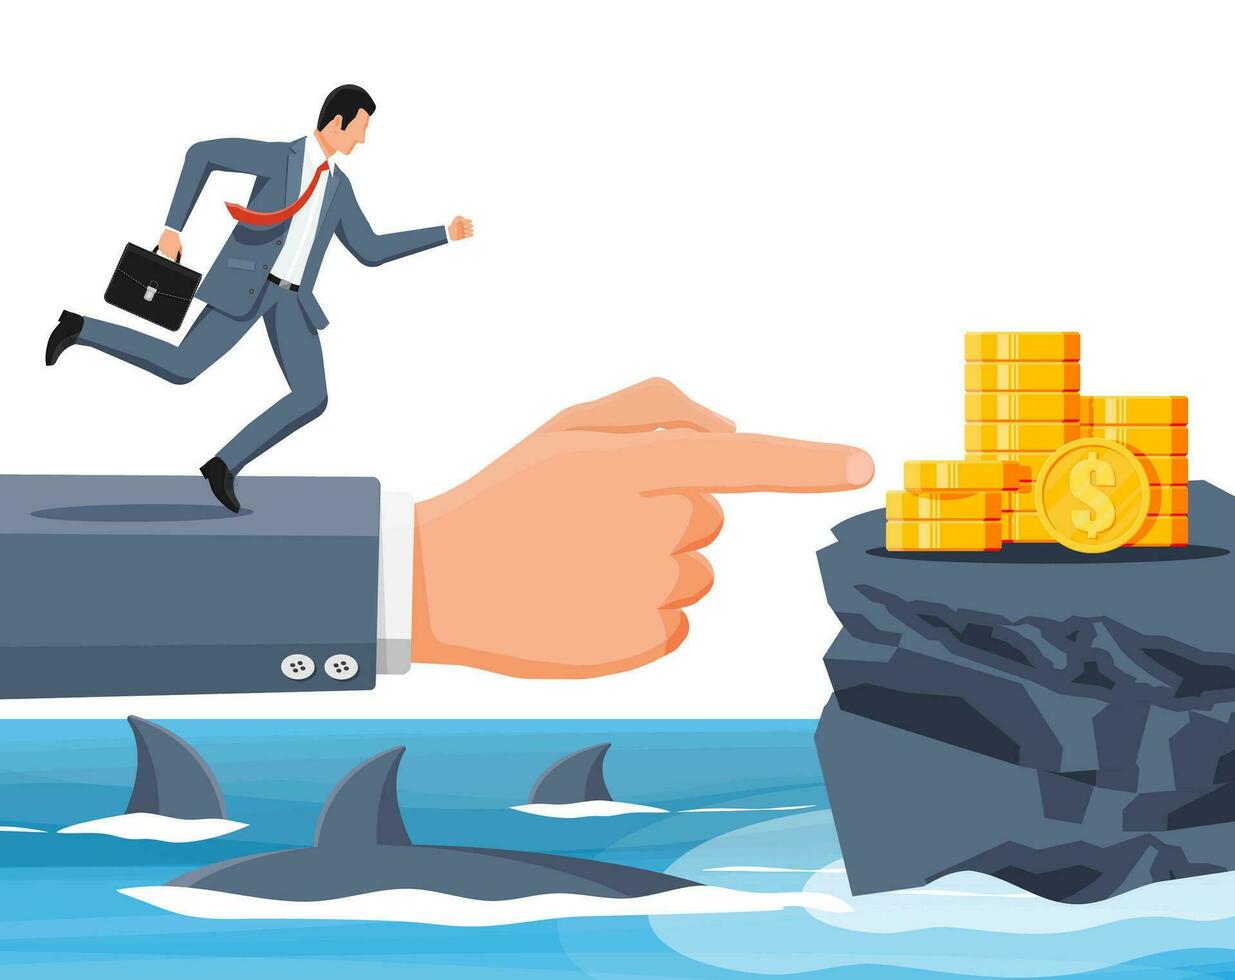 Businessman running on hand over shark in water. Business man in suit jump between gap. Obstacle on road, financial crisis. Team work, cooperation. Risk management challenge. Flat vector illustration